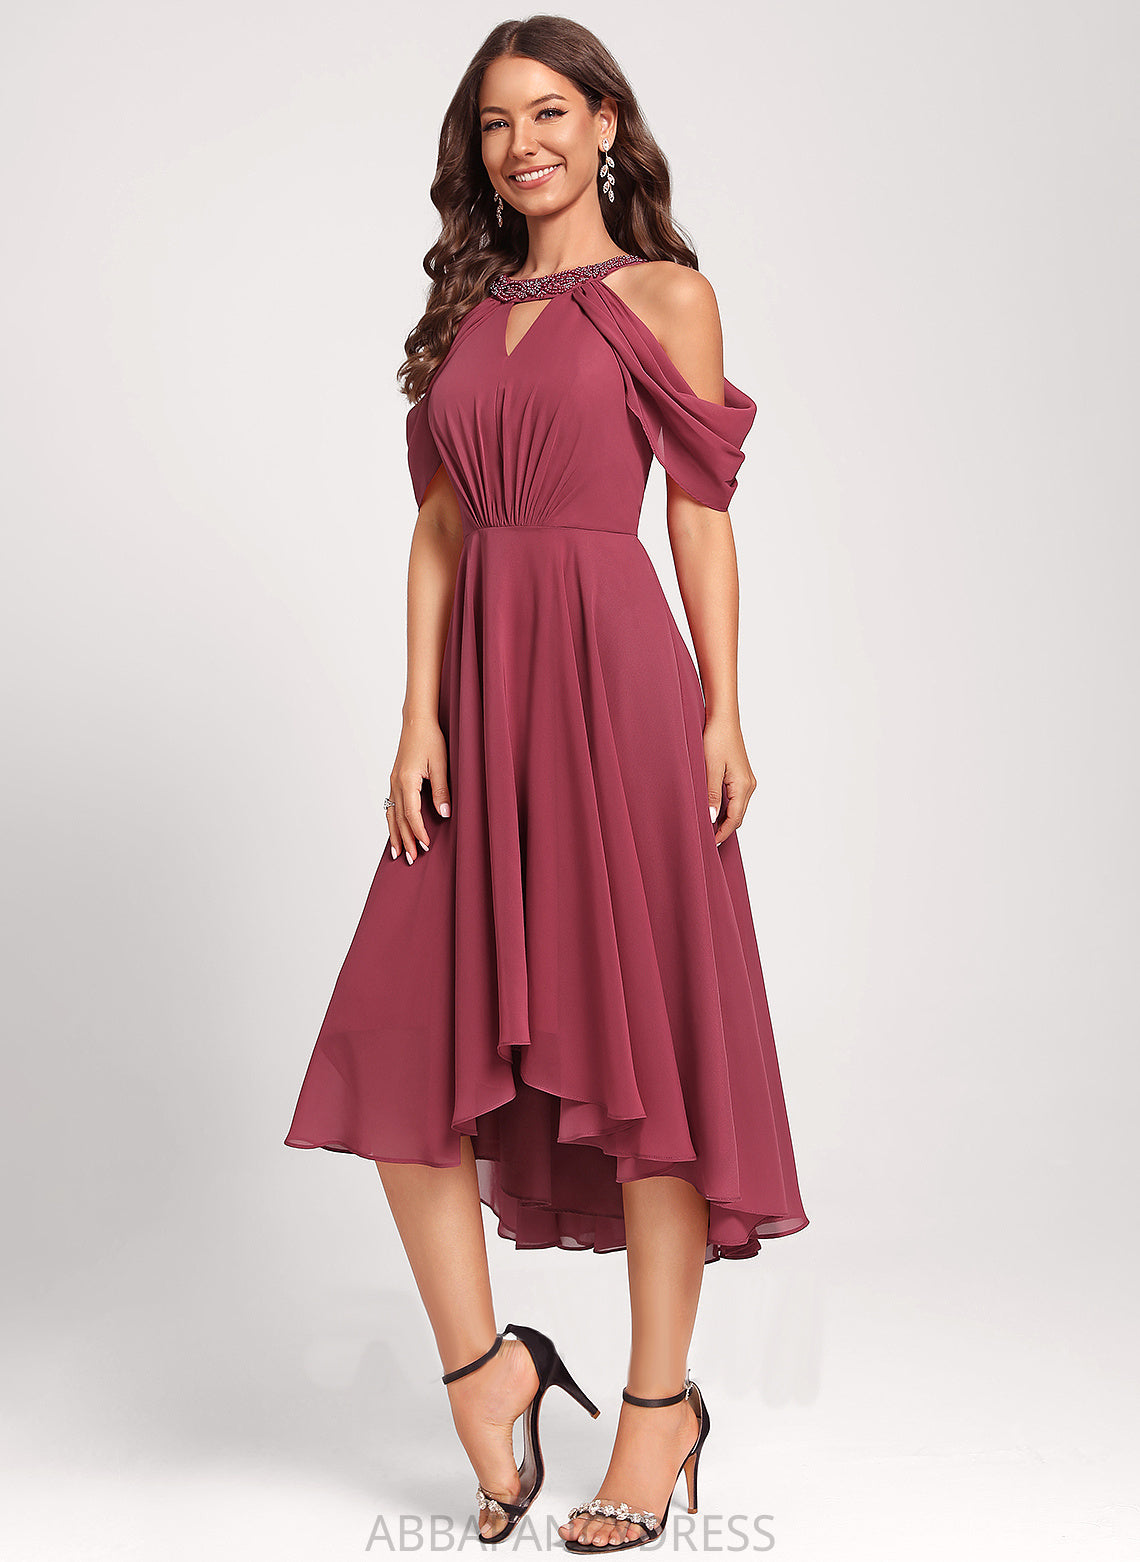 Eve Dress Chiffon Beading Scoop A-Line Neck Cocktail Asymmetrical With Sequins Club Dresses